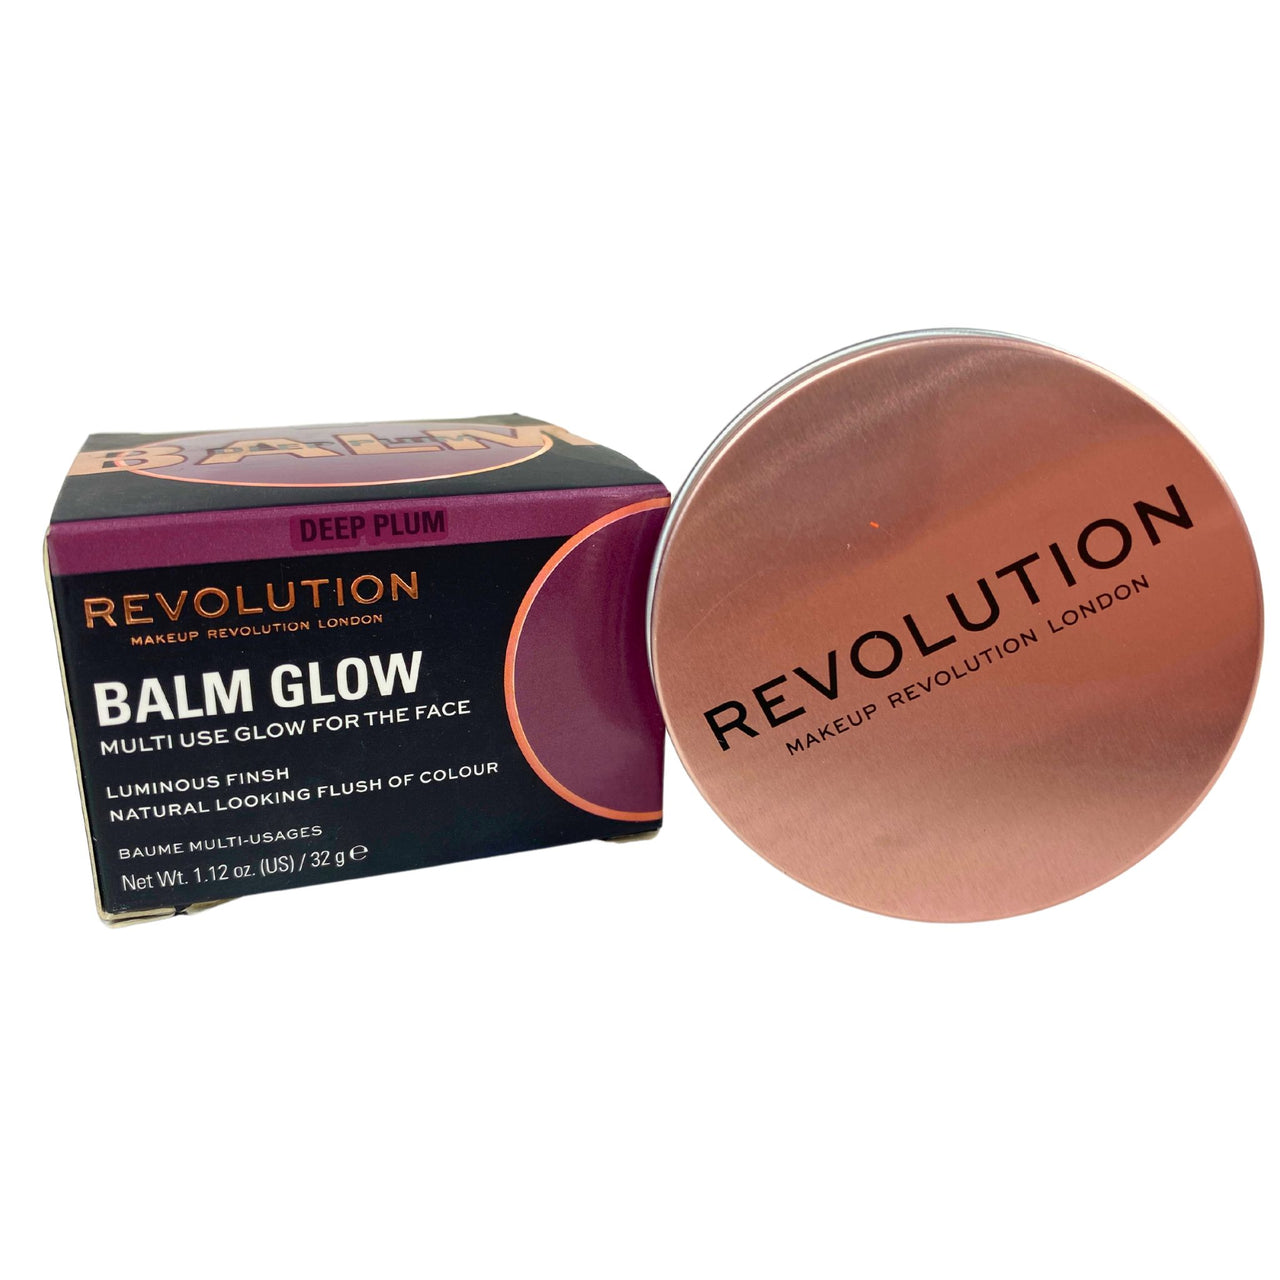 Revolution Balm Glow Multi Use Glow for the Face